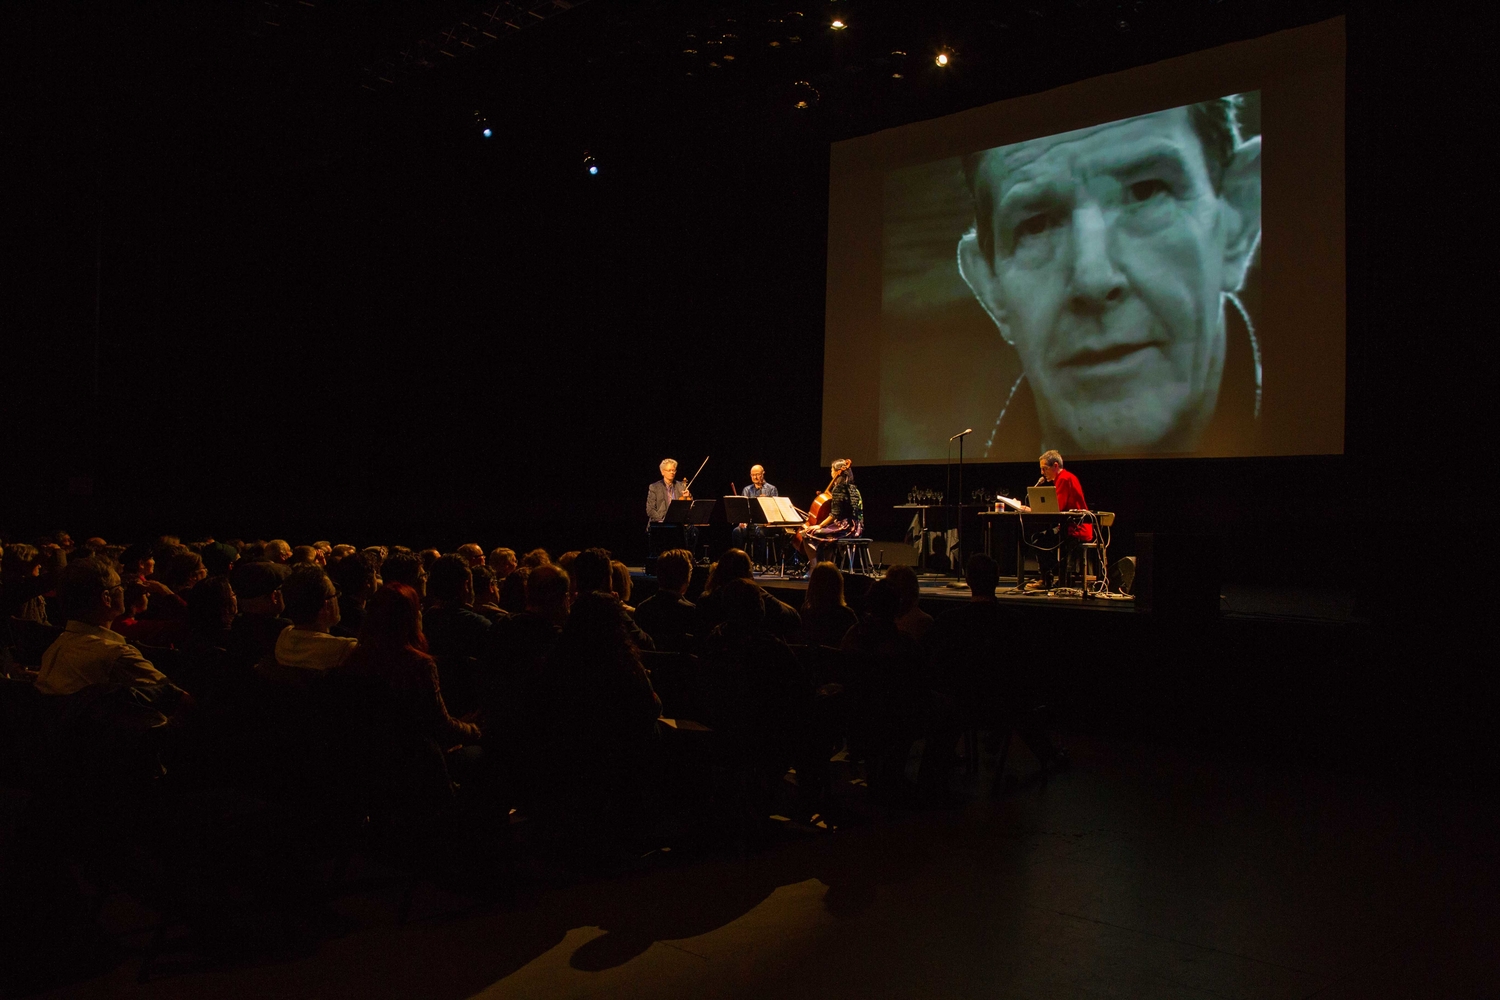 A performance of Sam Green and Joe Bini's "A Thousand Thoughts," featuring the Kronos Quartet, at the Wexner Center in Columbus, OH. Courtesy of Sam Green